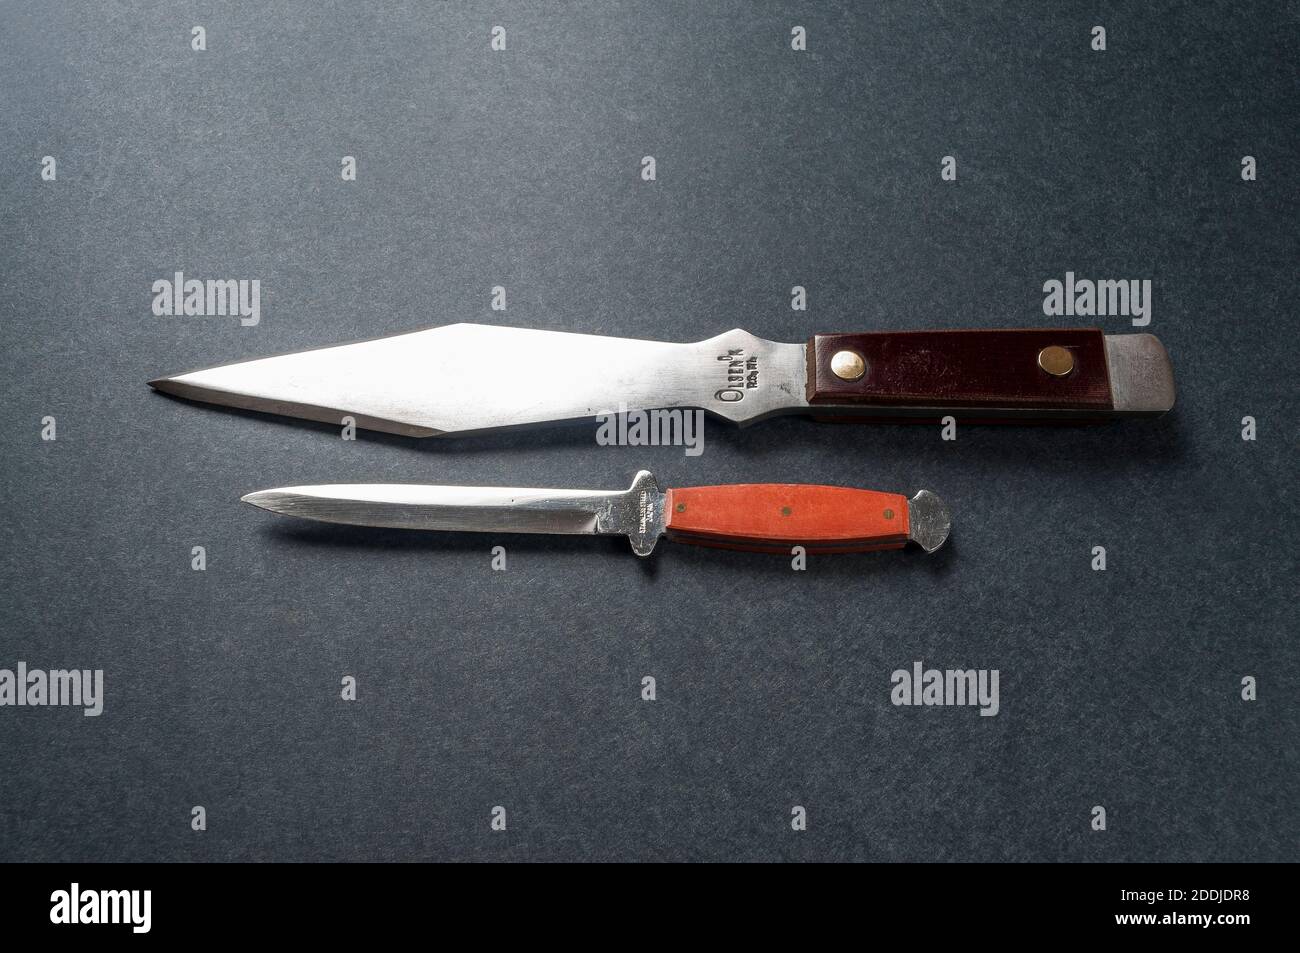 https://c8.alamy.com/comp/2DDJDR8/two-different-vintage-throwing-knives-the-larger-is-an-olsen-ok-throwing-knife-the-smaller-is-imprinted-with-stainless-japan-2DDJDR8.jpg